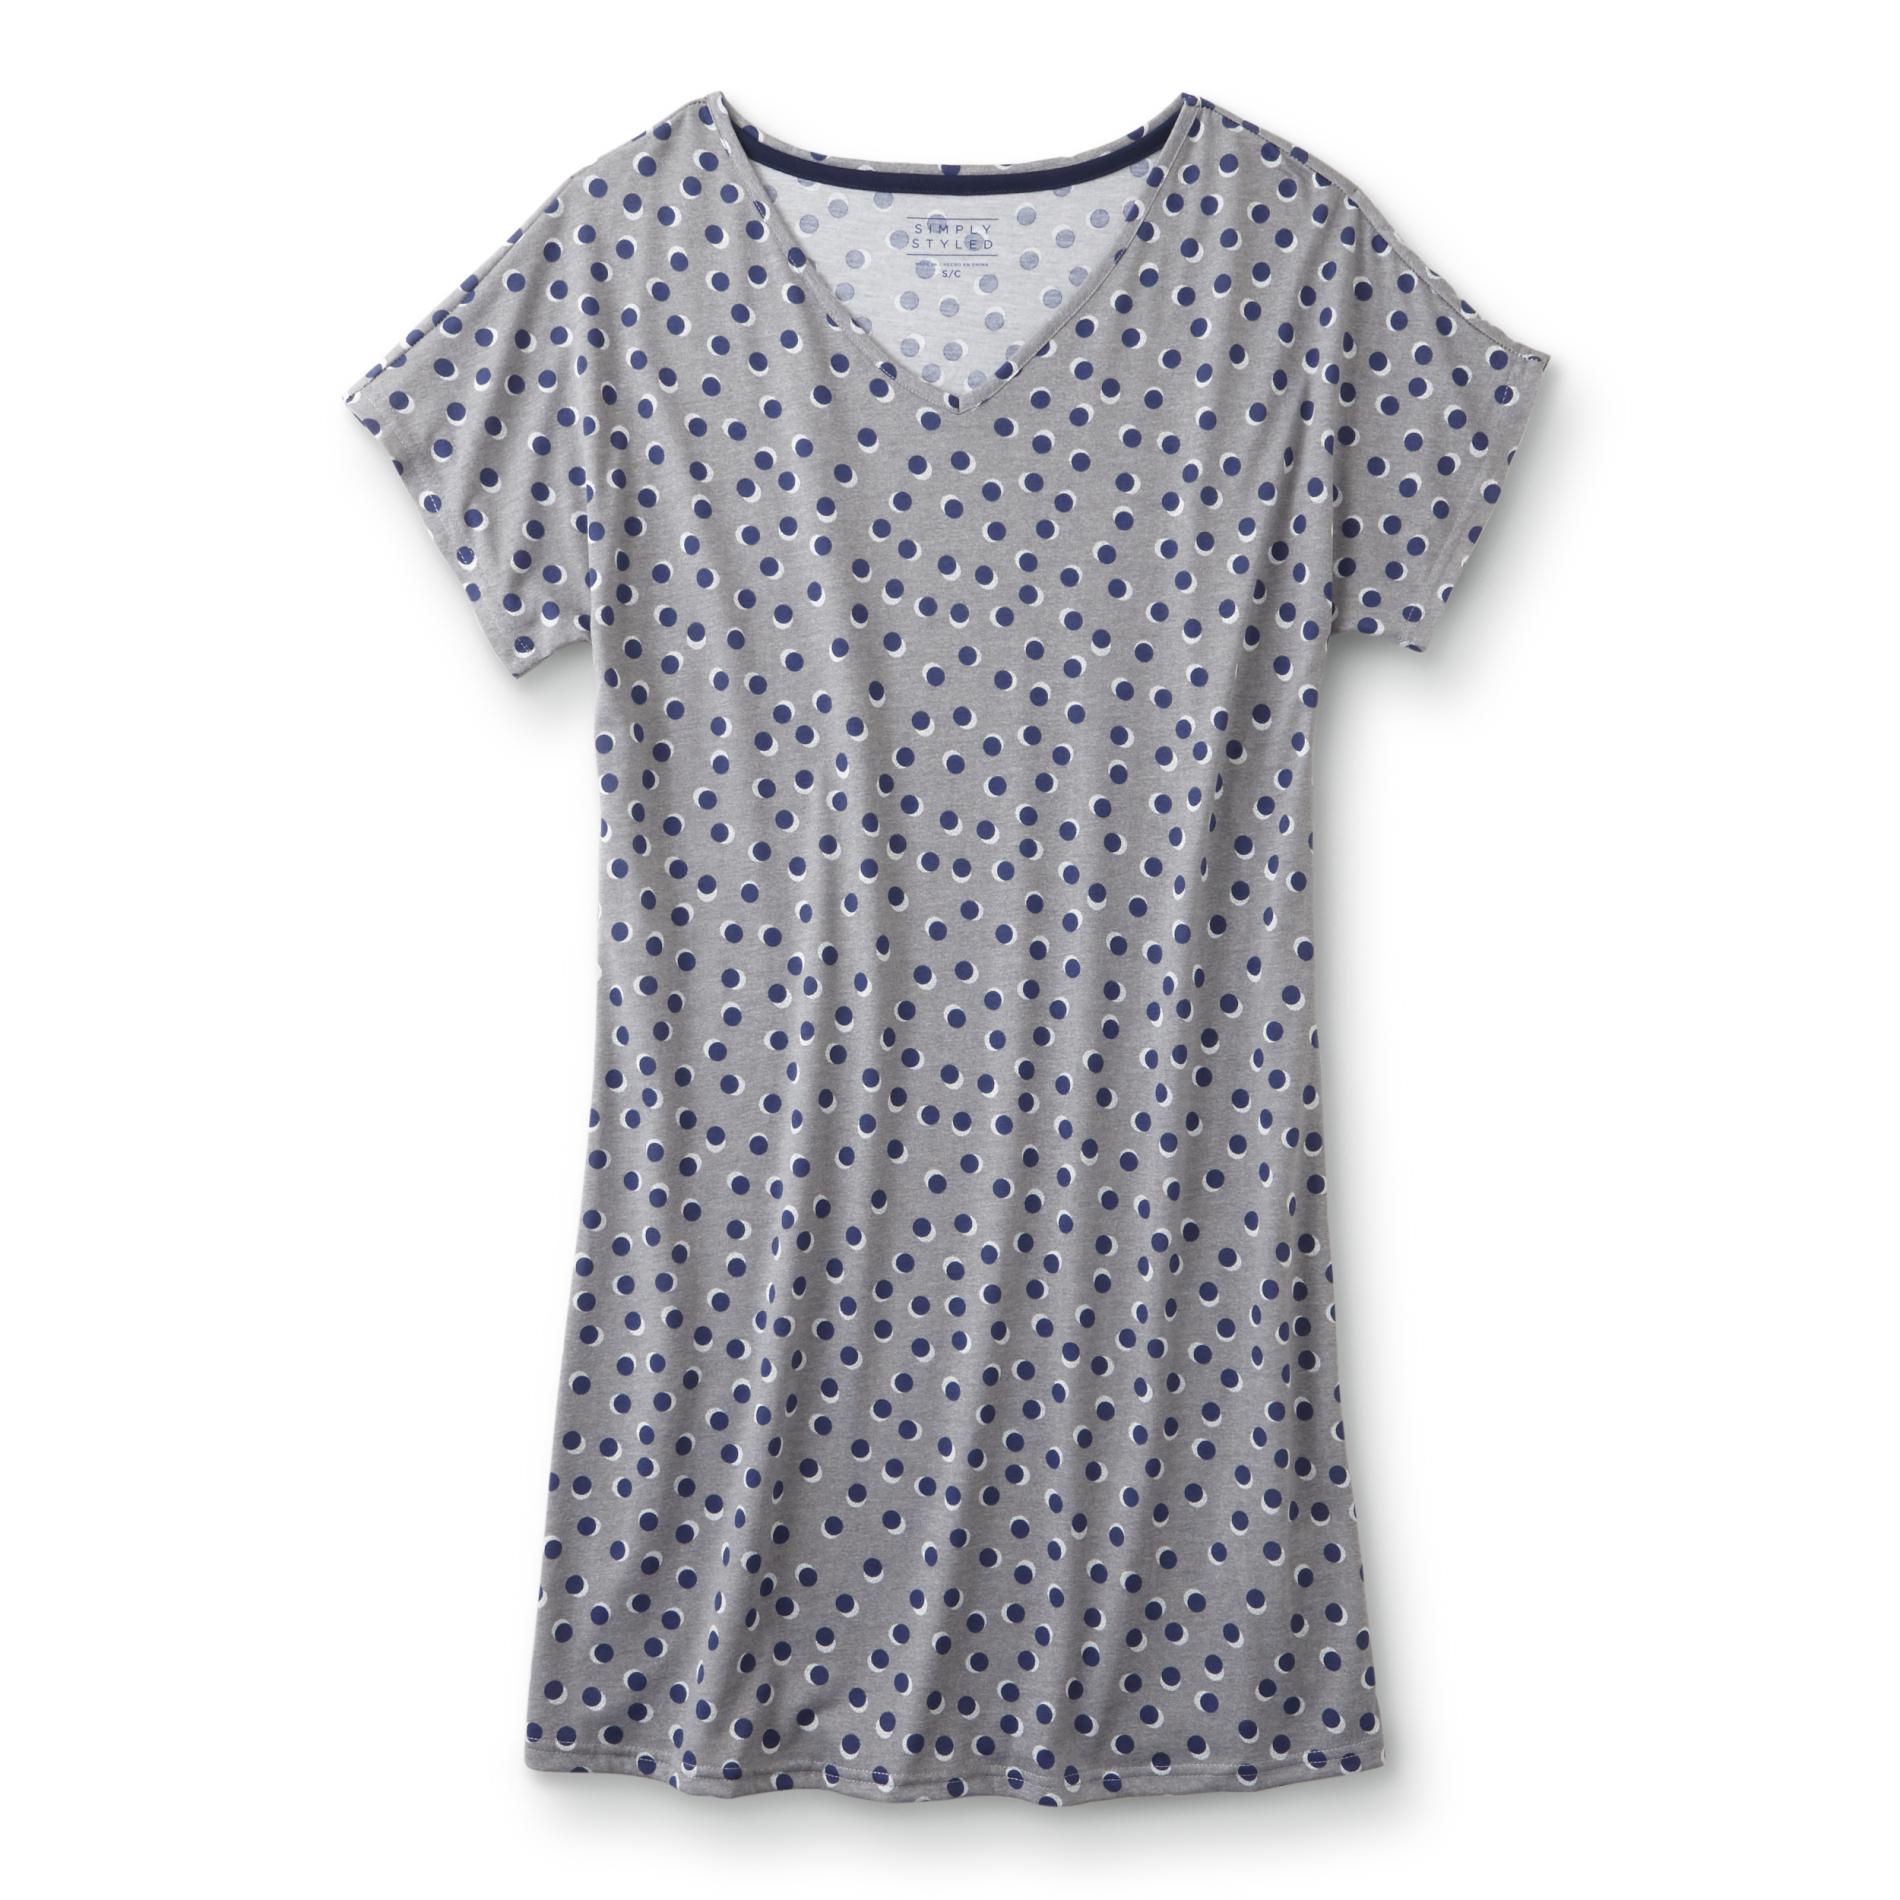 Simply Styled Women's Nightgown - Dots